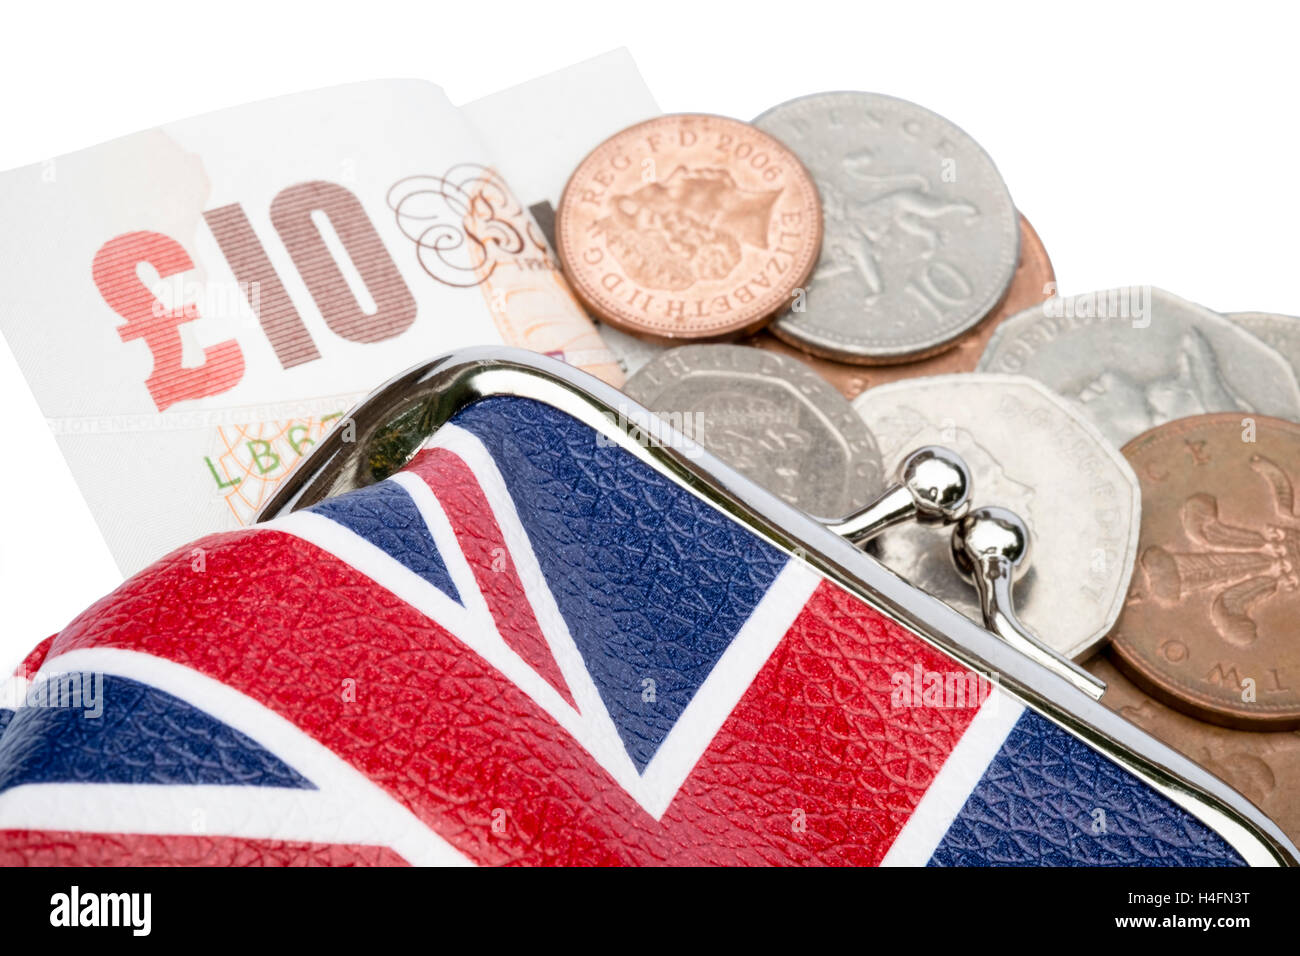 Purse with coins money & £10 pound note spilling out. Union Jack design. Stock Photo